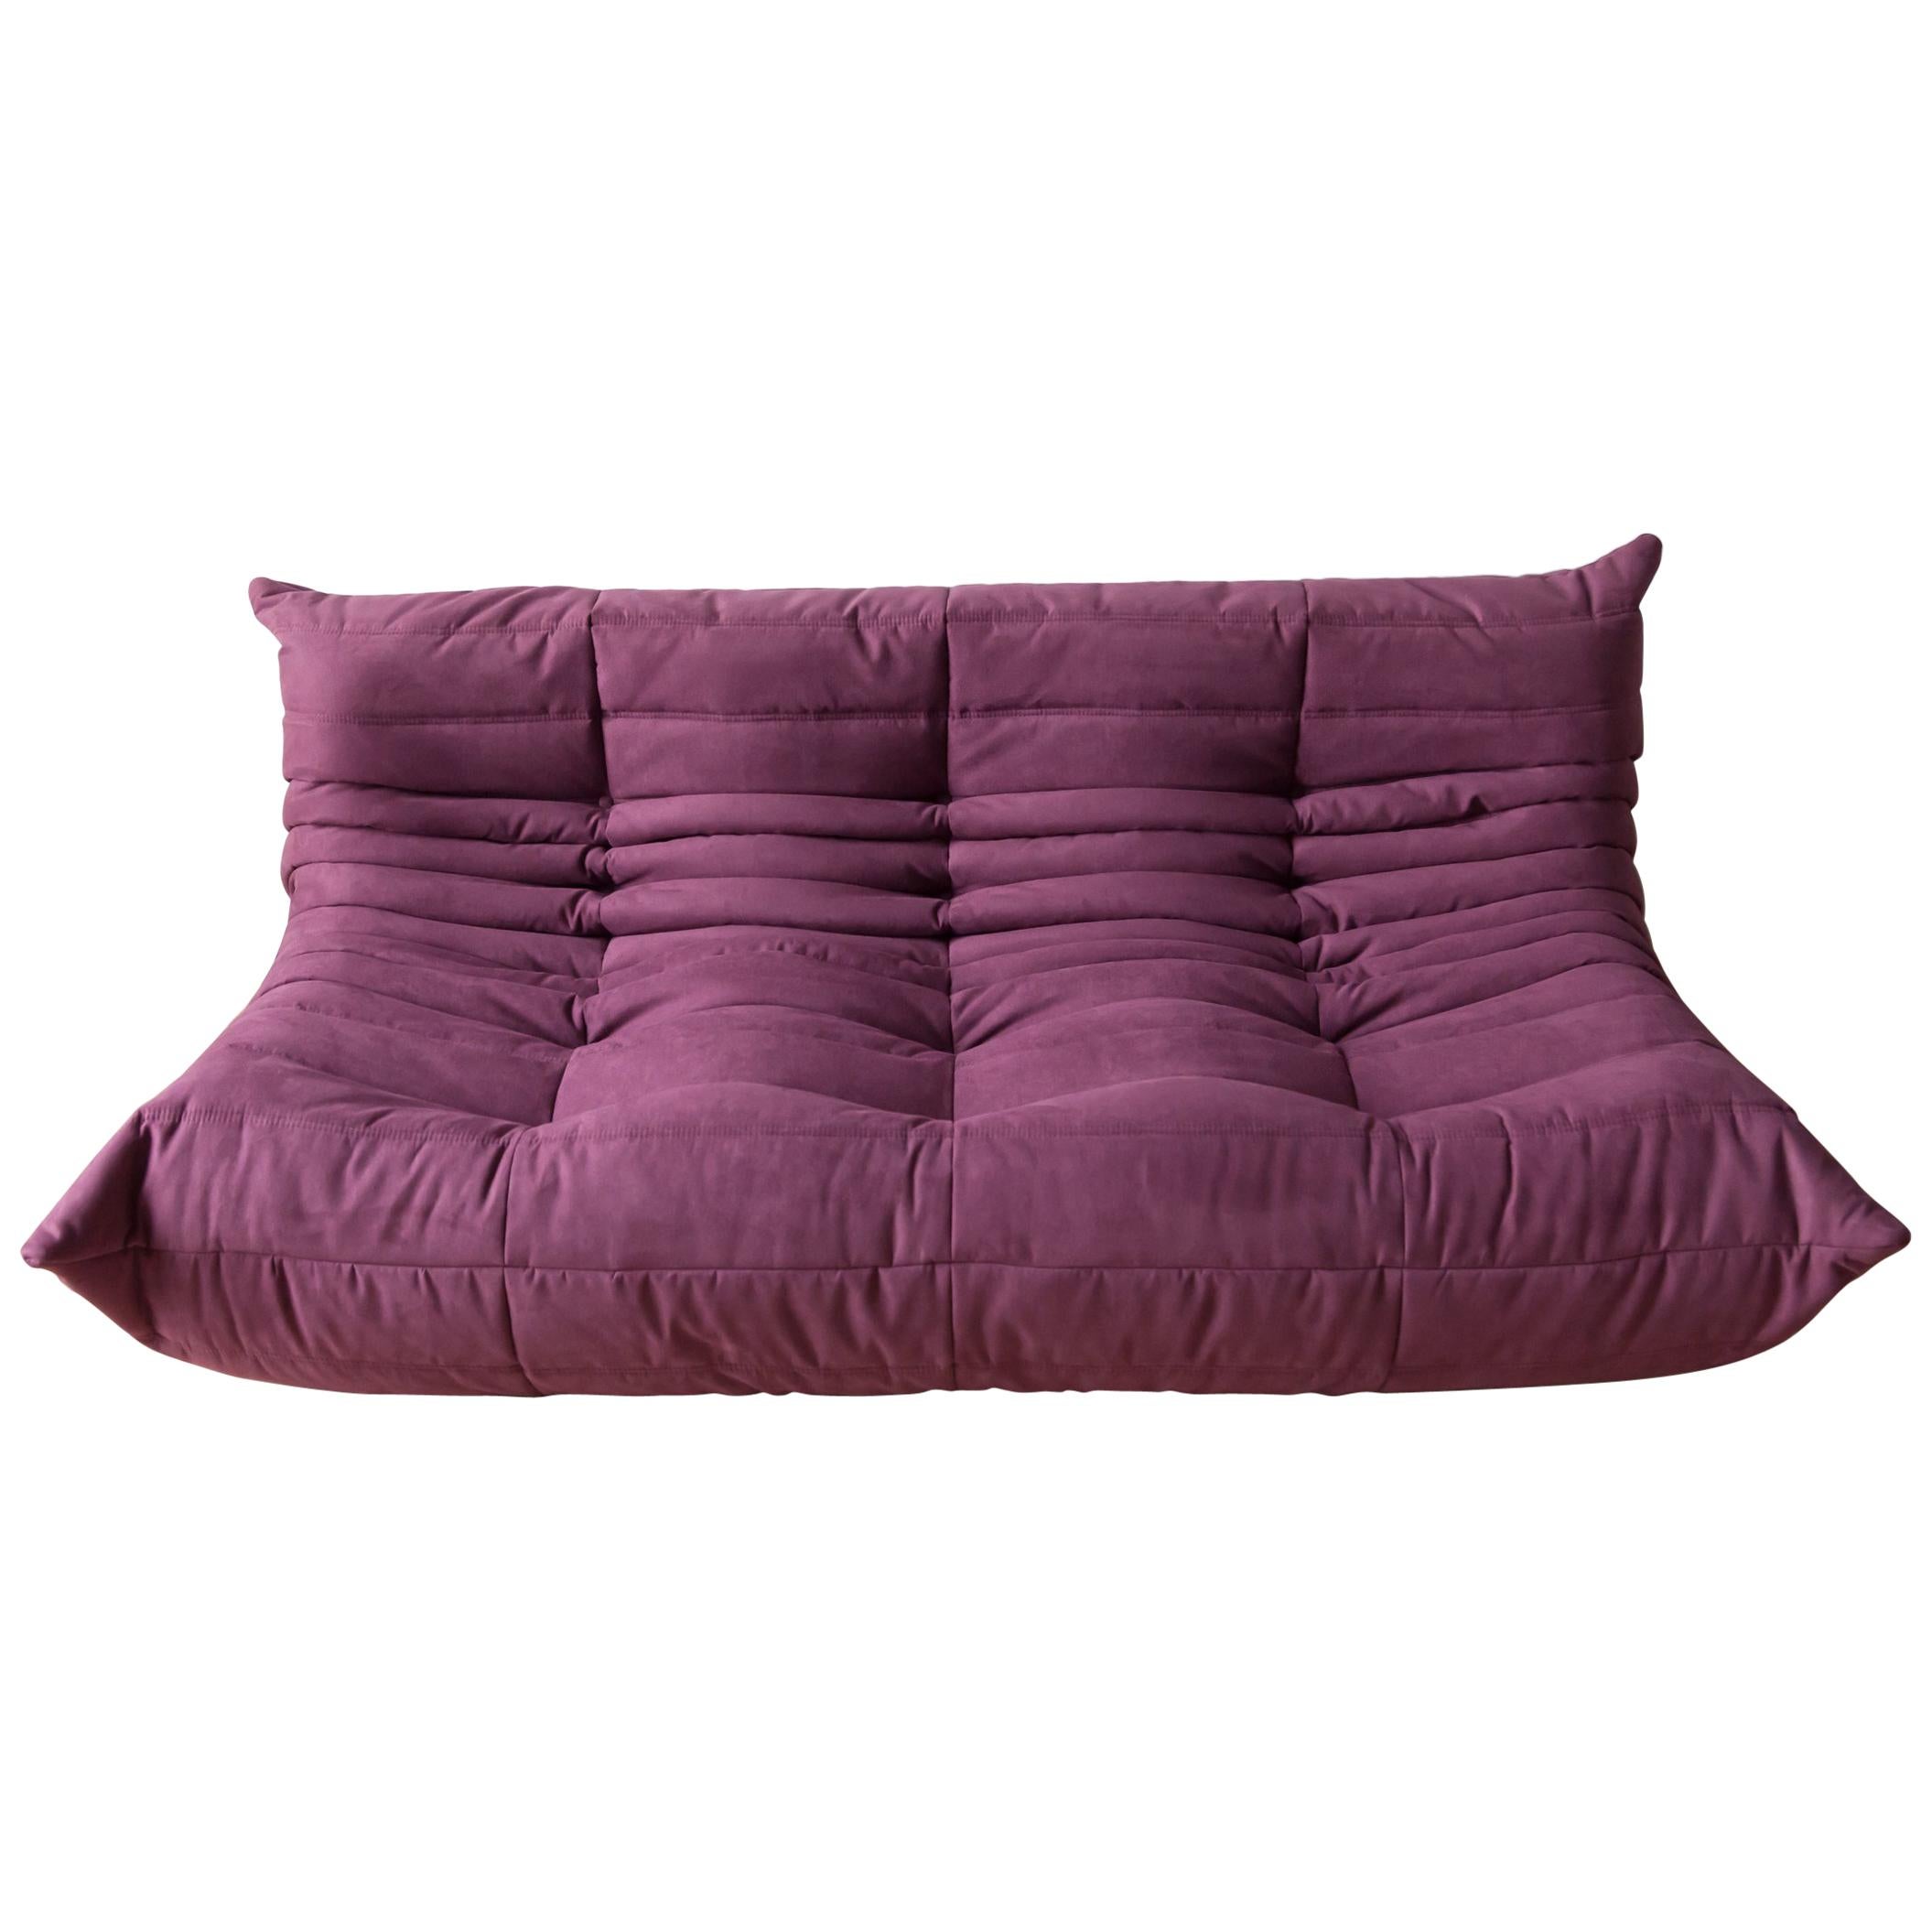 Togo 3-Seat Sofa in Aubergine Microfibre by Michel Ducaroy for Ligne Roset For Sale